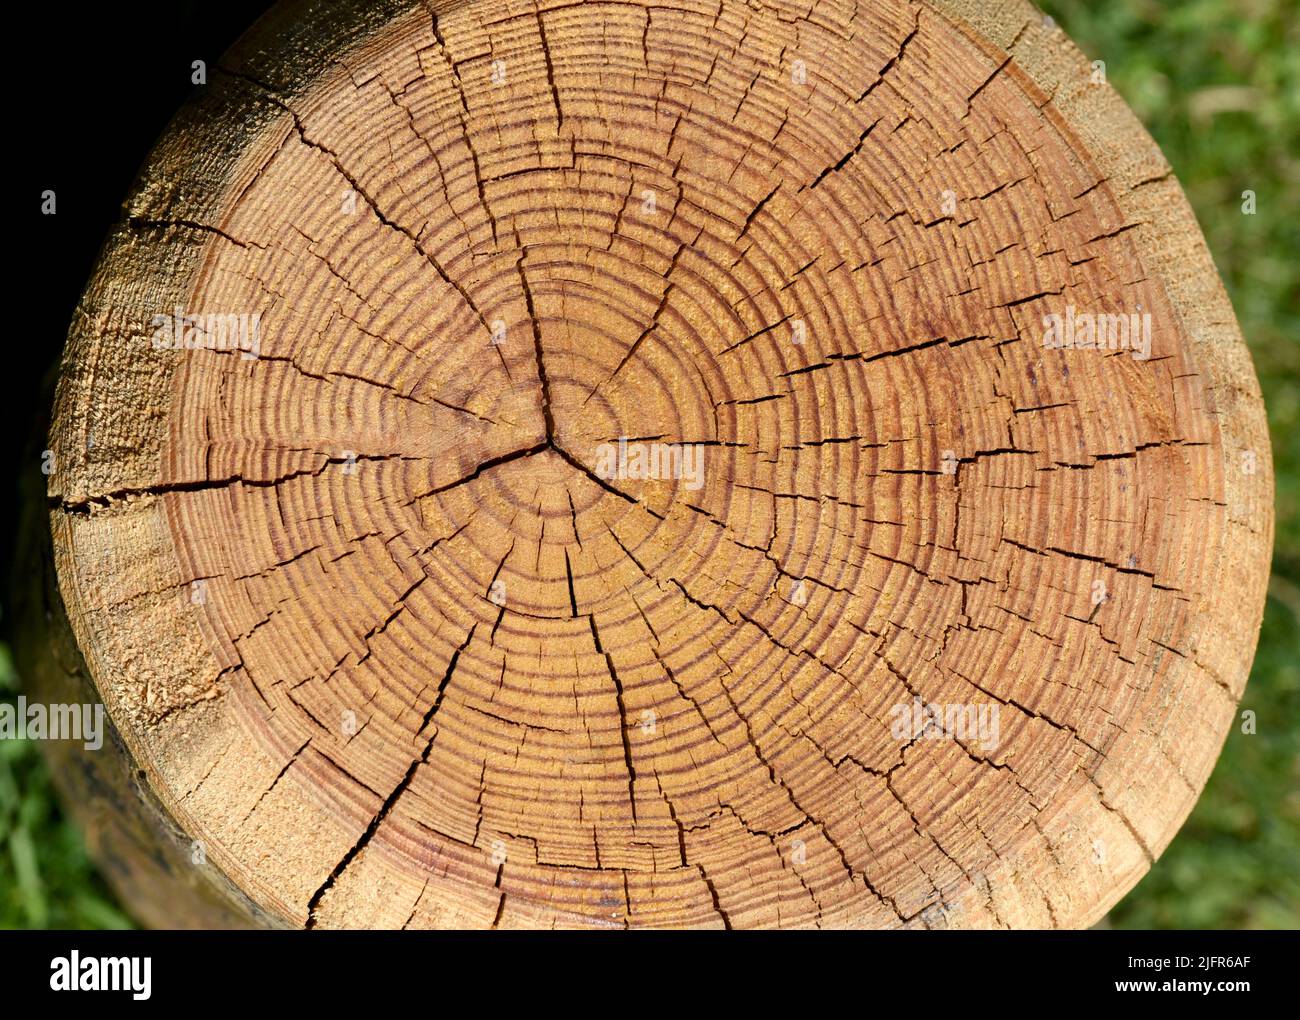 Jahresringe sind die Wachstumsringe eines Baumes im Querschnitt. Annual rings are the growth rings of a tree in cross section. Stock Photo